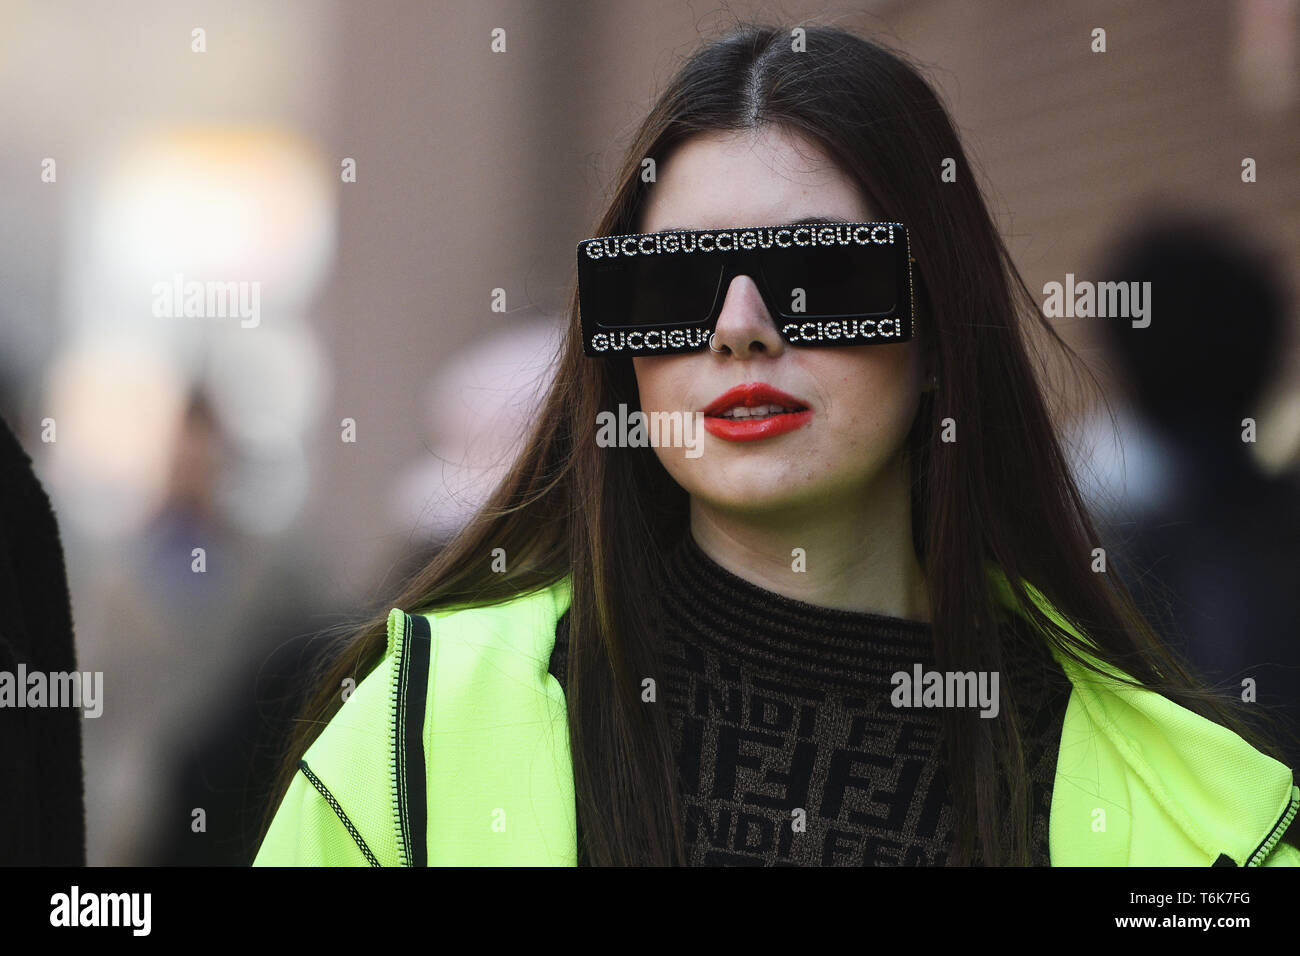 Milan, Italy - February 21, 2019: Street style – Woman wearing a Fendi purse before a fashion show during Milan Fashion Week - MFWFW19 Stock Photo